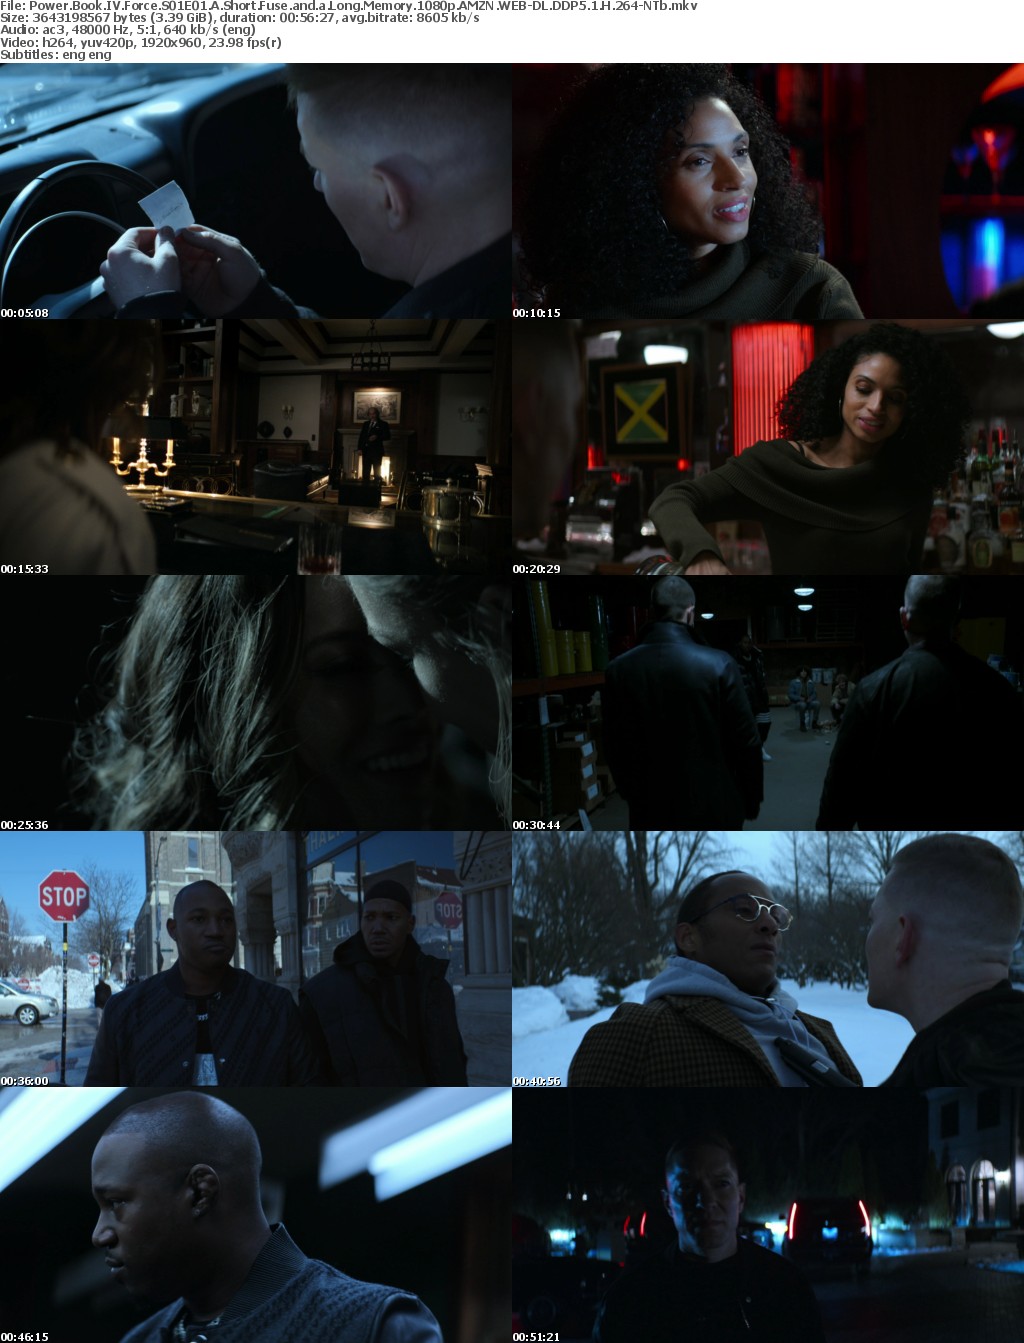 Power Book IV Force S01E01 A Short Fuse and a Long Memory 1080p AMZN WEBRip DDP5 1 x264-NTb